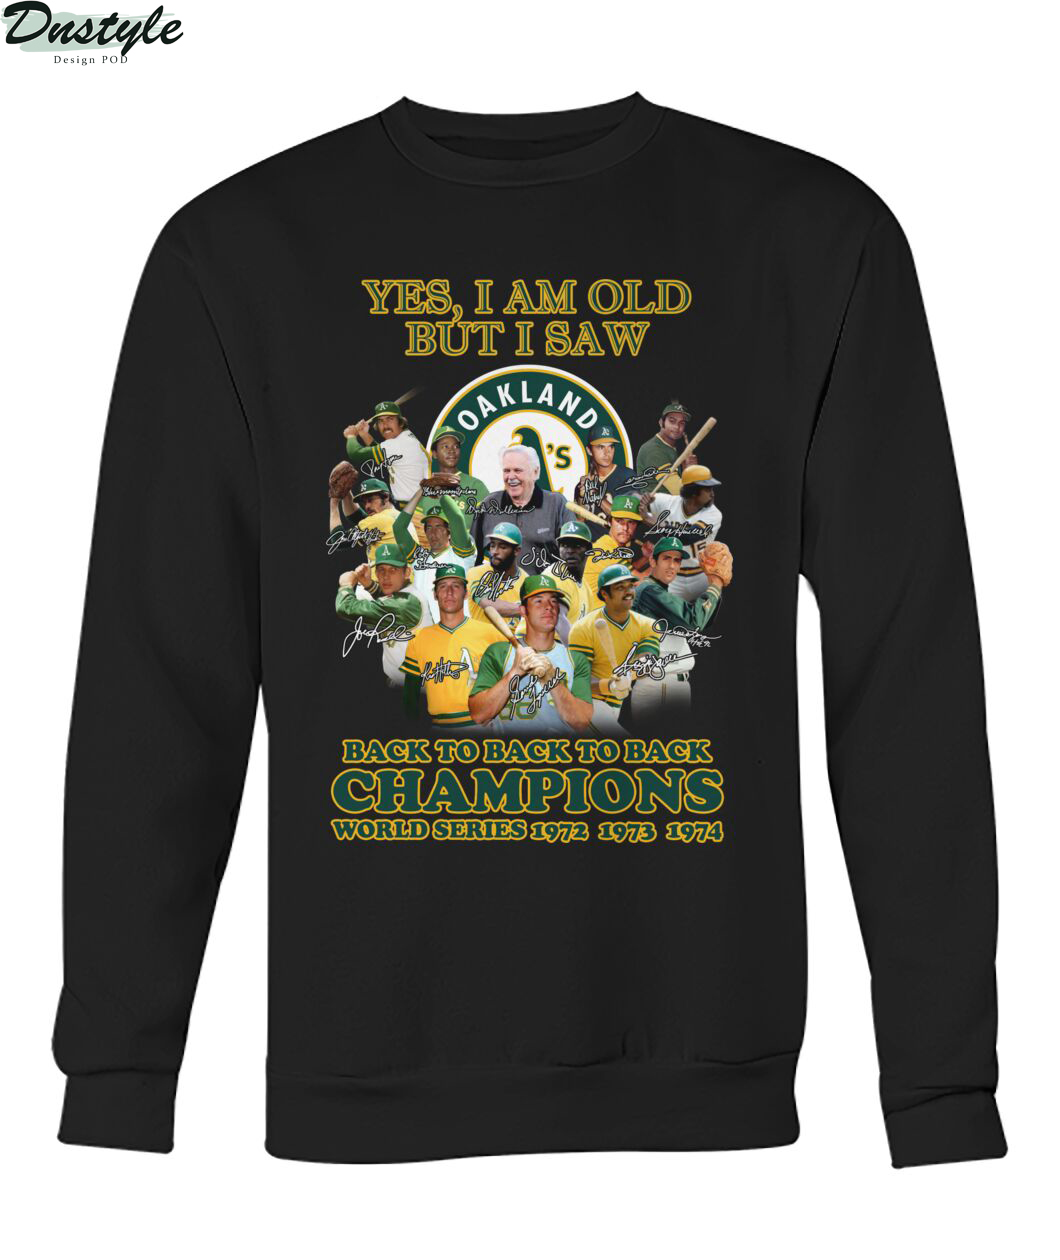 Yes I am old but I saw back to back to back champions sweatshirt